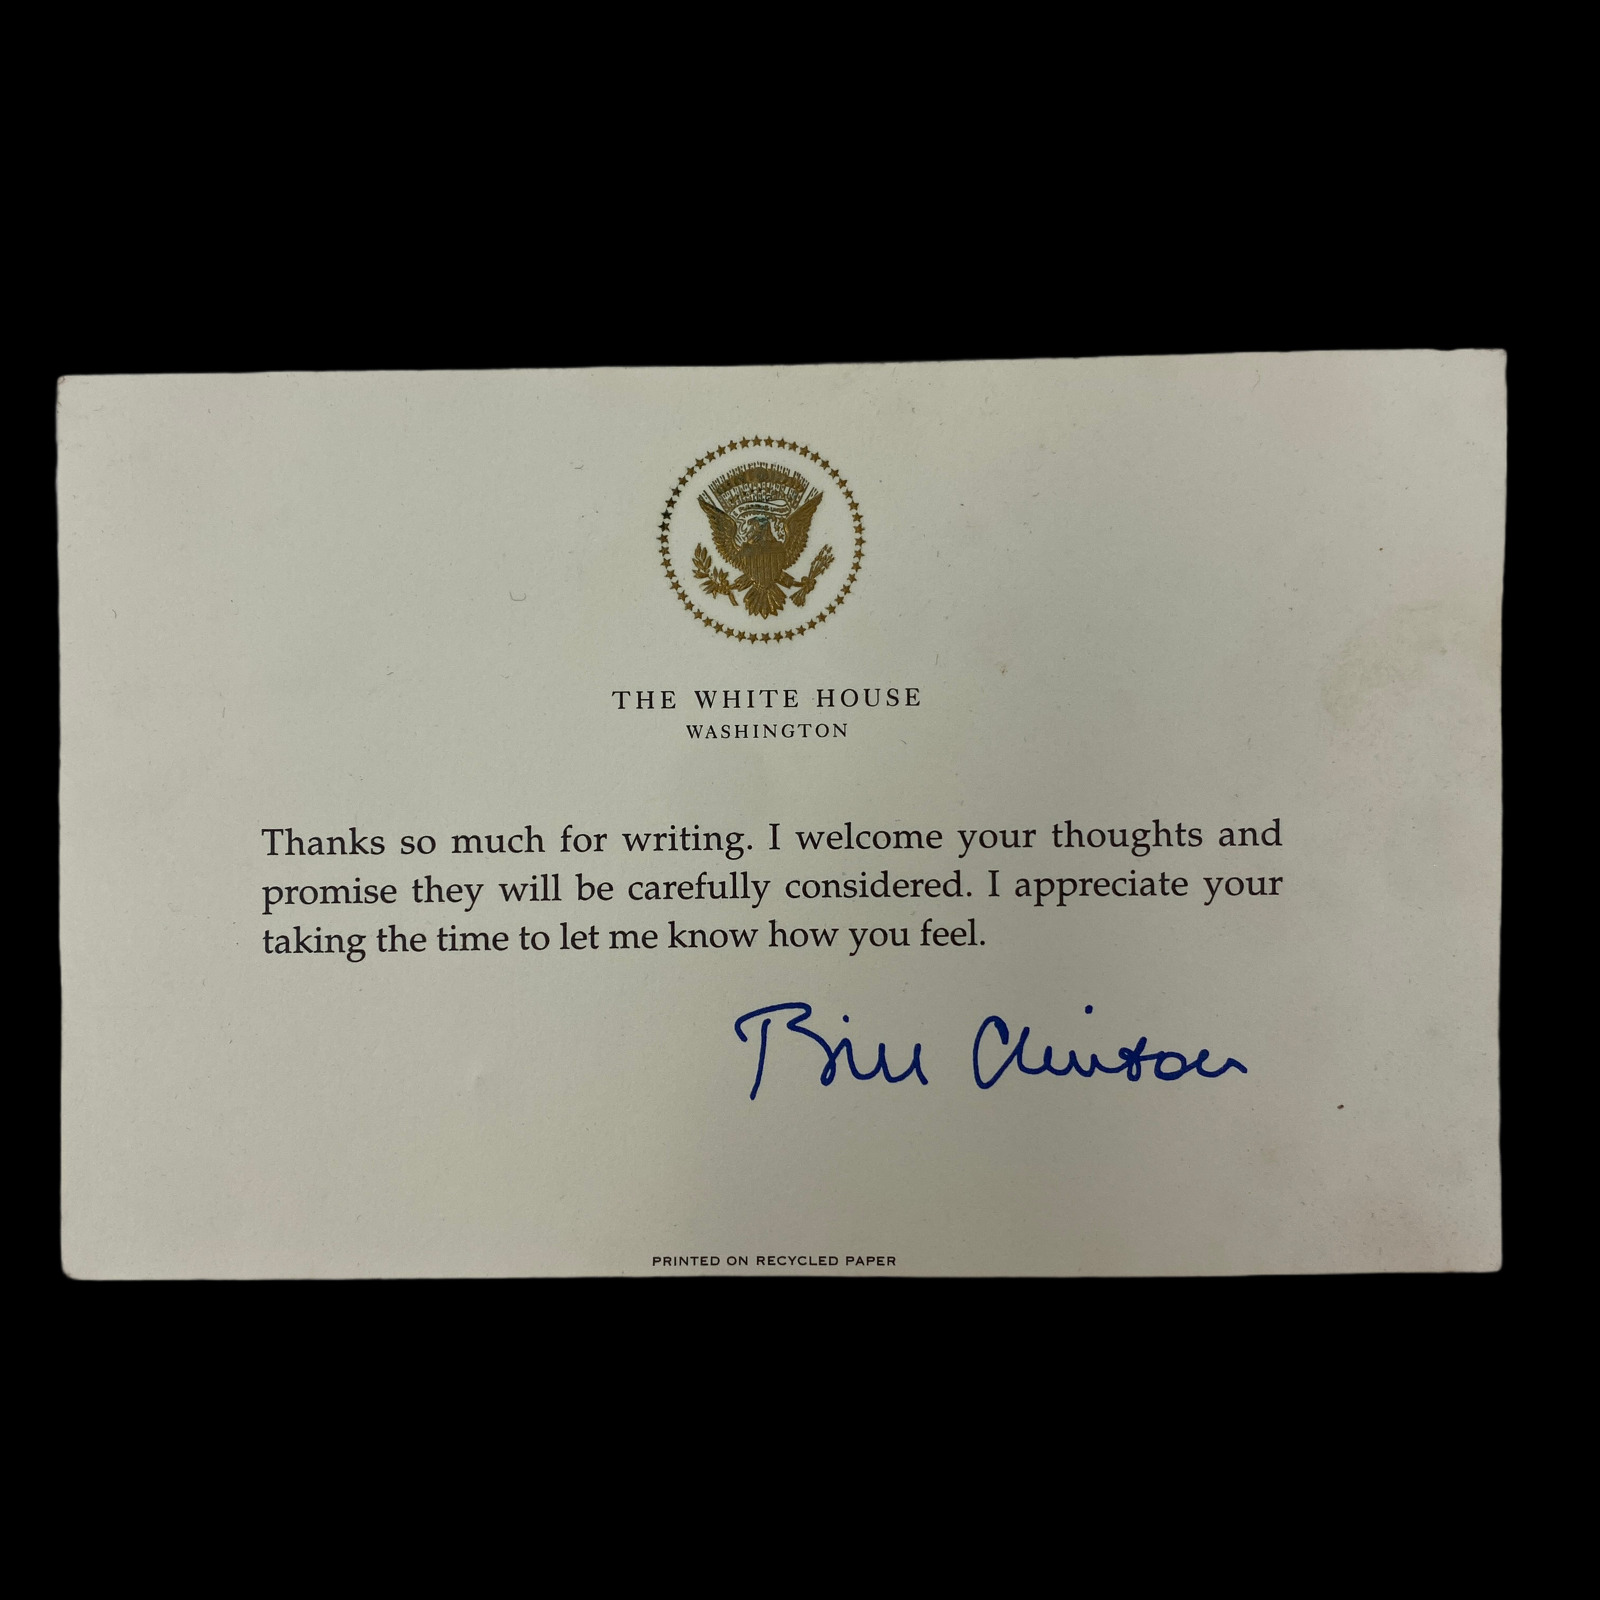 RARE Authentic Original White House Letter Note 42nd President Bill Clinton